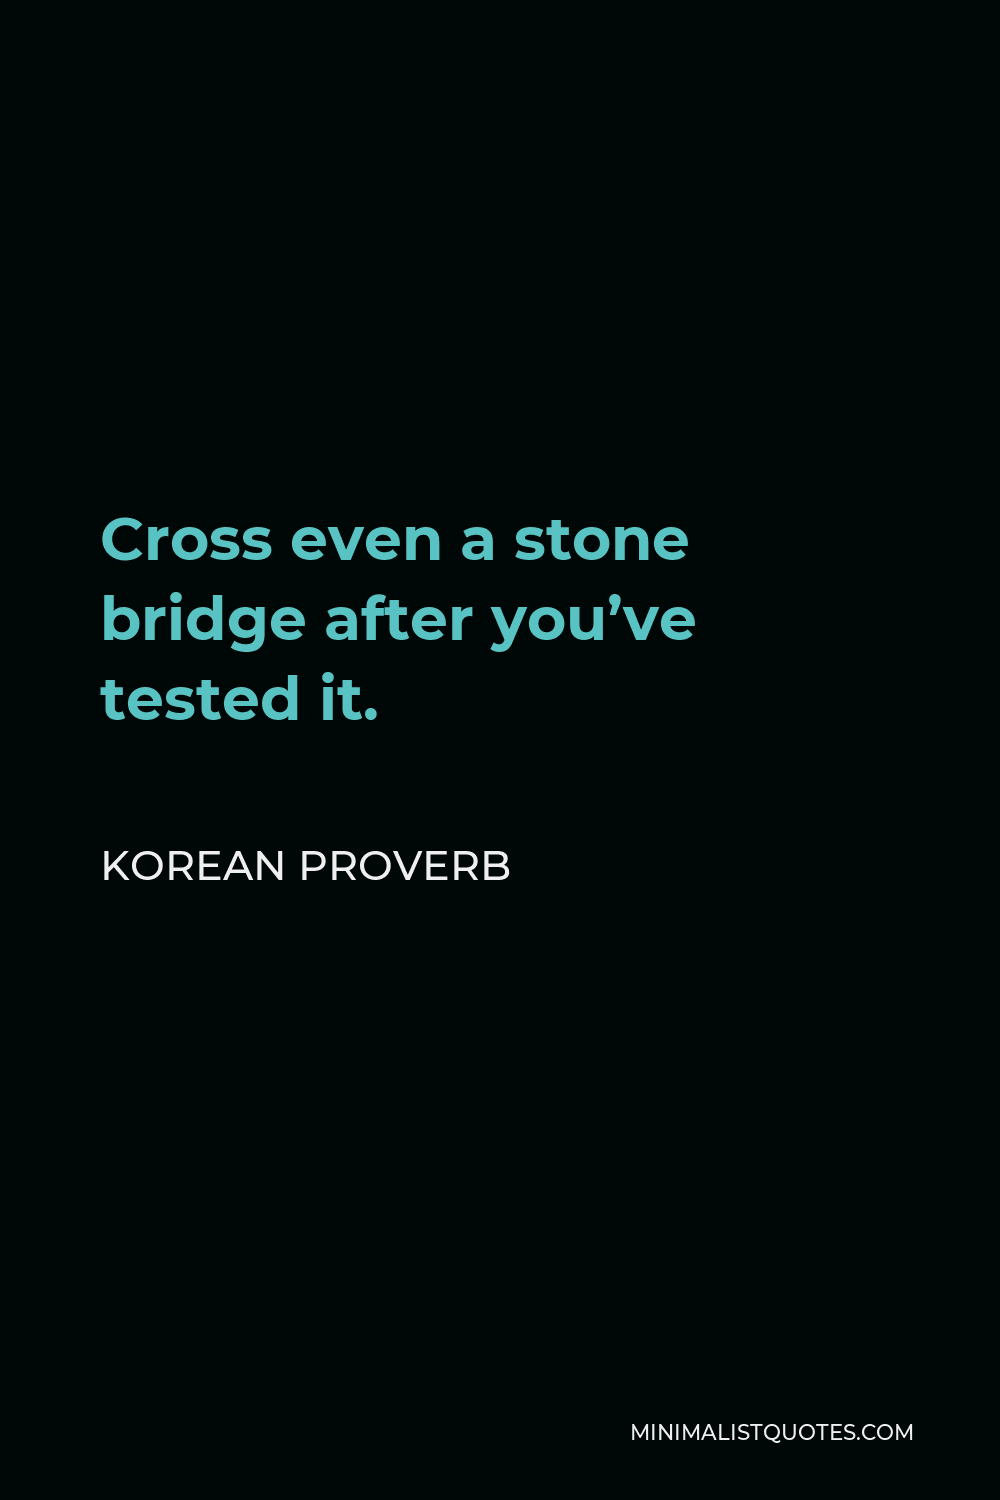 Korean Proverb Quote - Cross even a stone bridge after you’ve tested it.